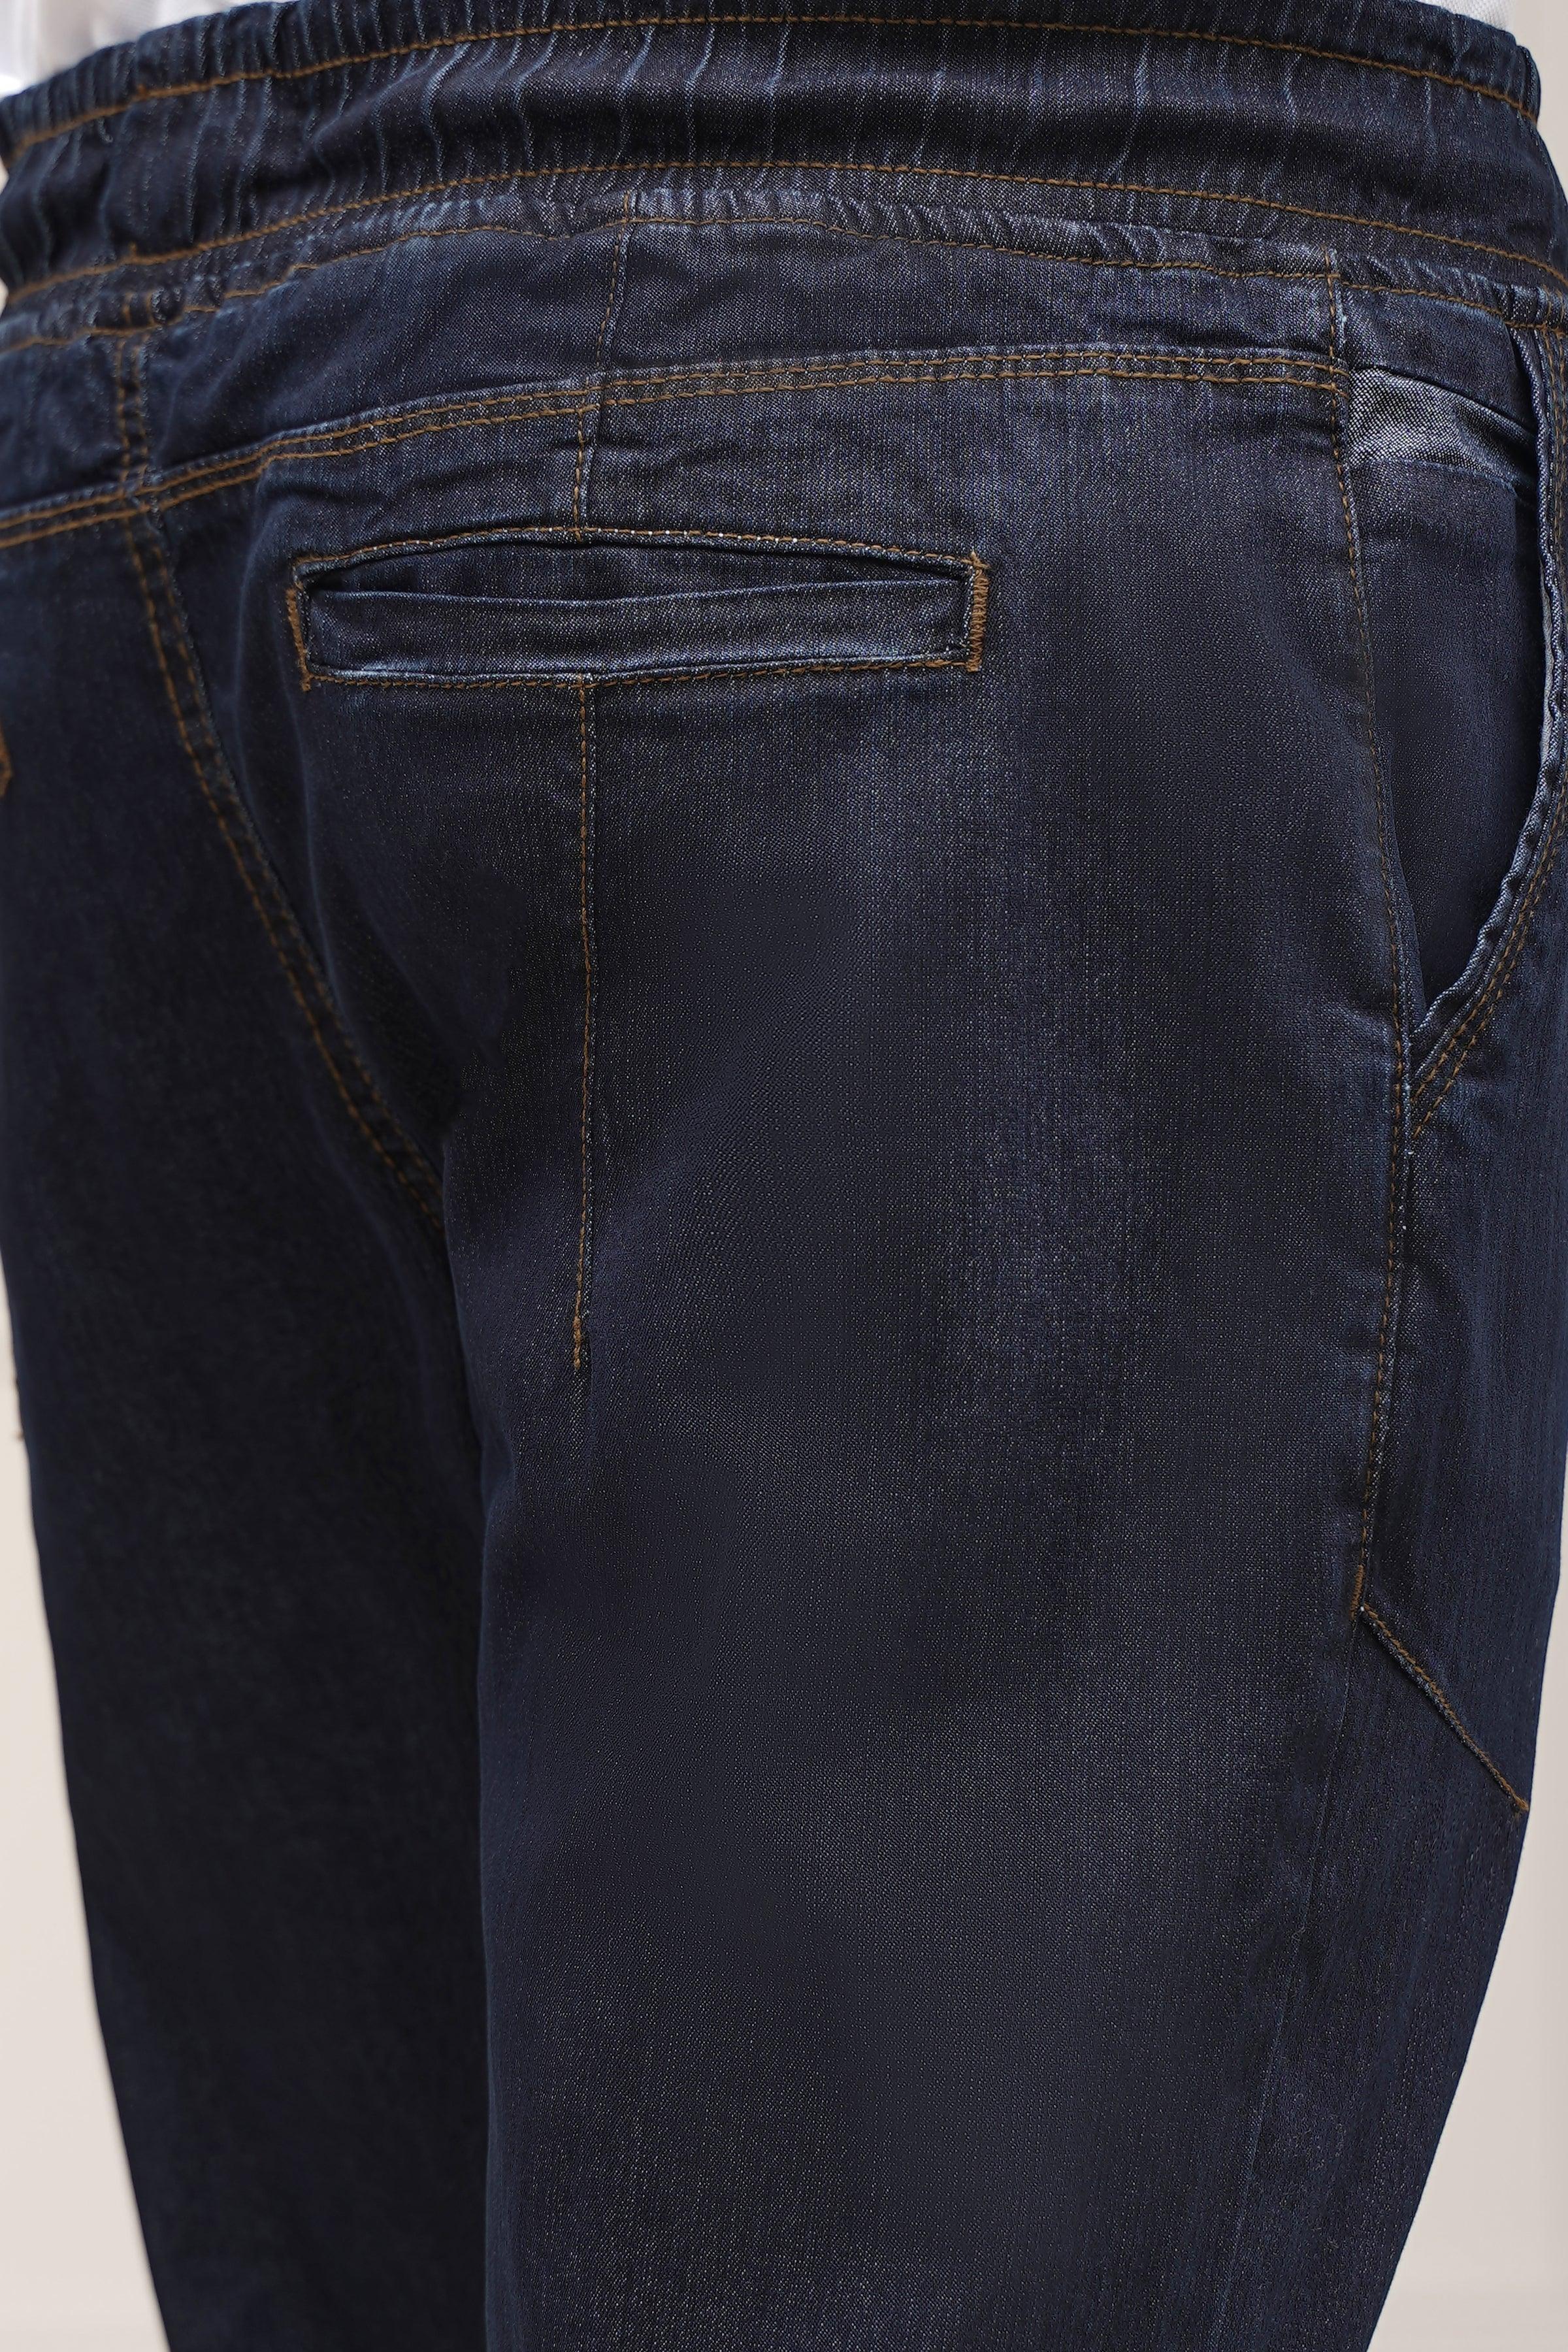 DENIM TROUSER NAVY BLUE at Charcoal Clothing